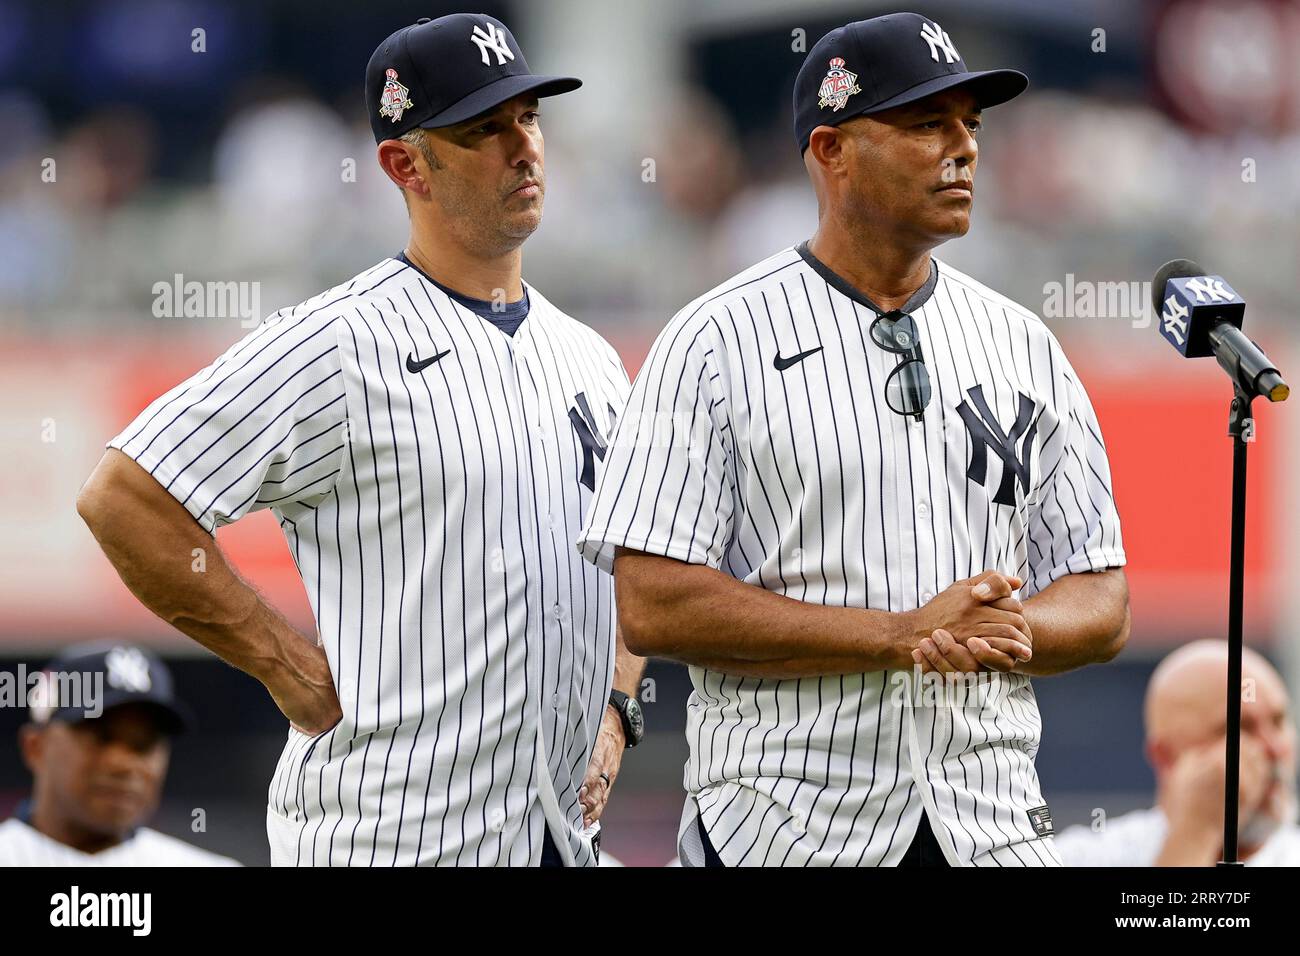 Yankees to retire numbers of Pettitte, Posada and Williams